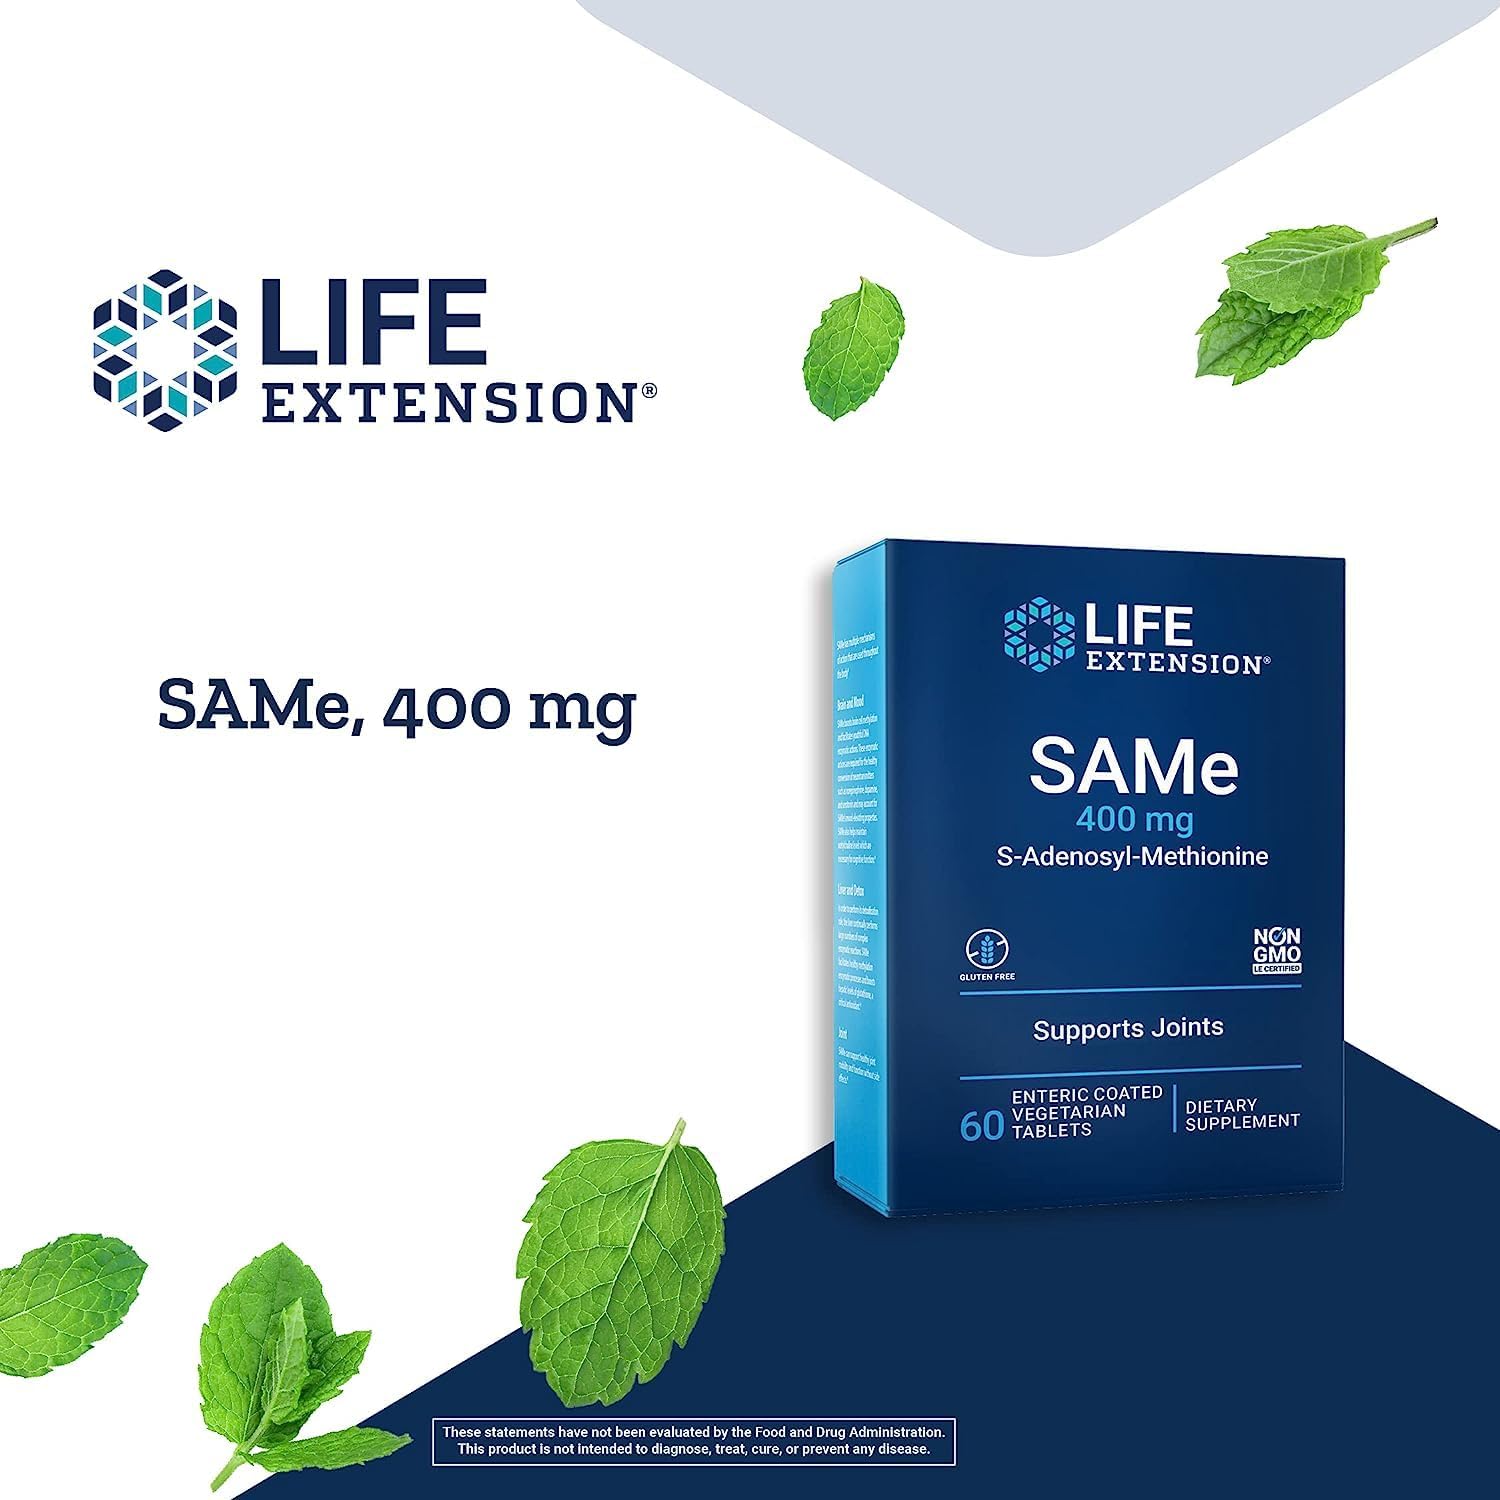 Life Extension Same 400mg (S-Adenosyl-Methionine) - Supplement for Joint  Liver Support - Non-GMO, Gluten-Free, Tablet, 60 Count